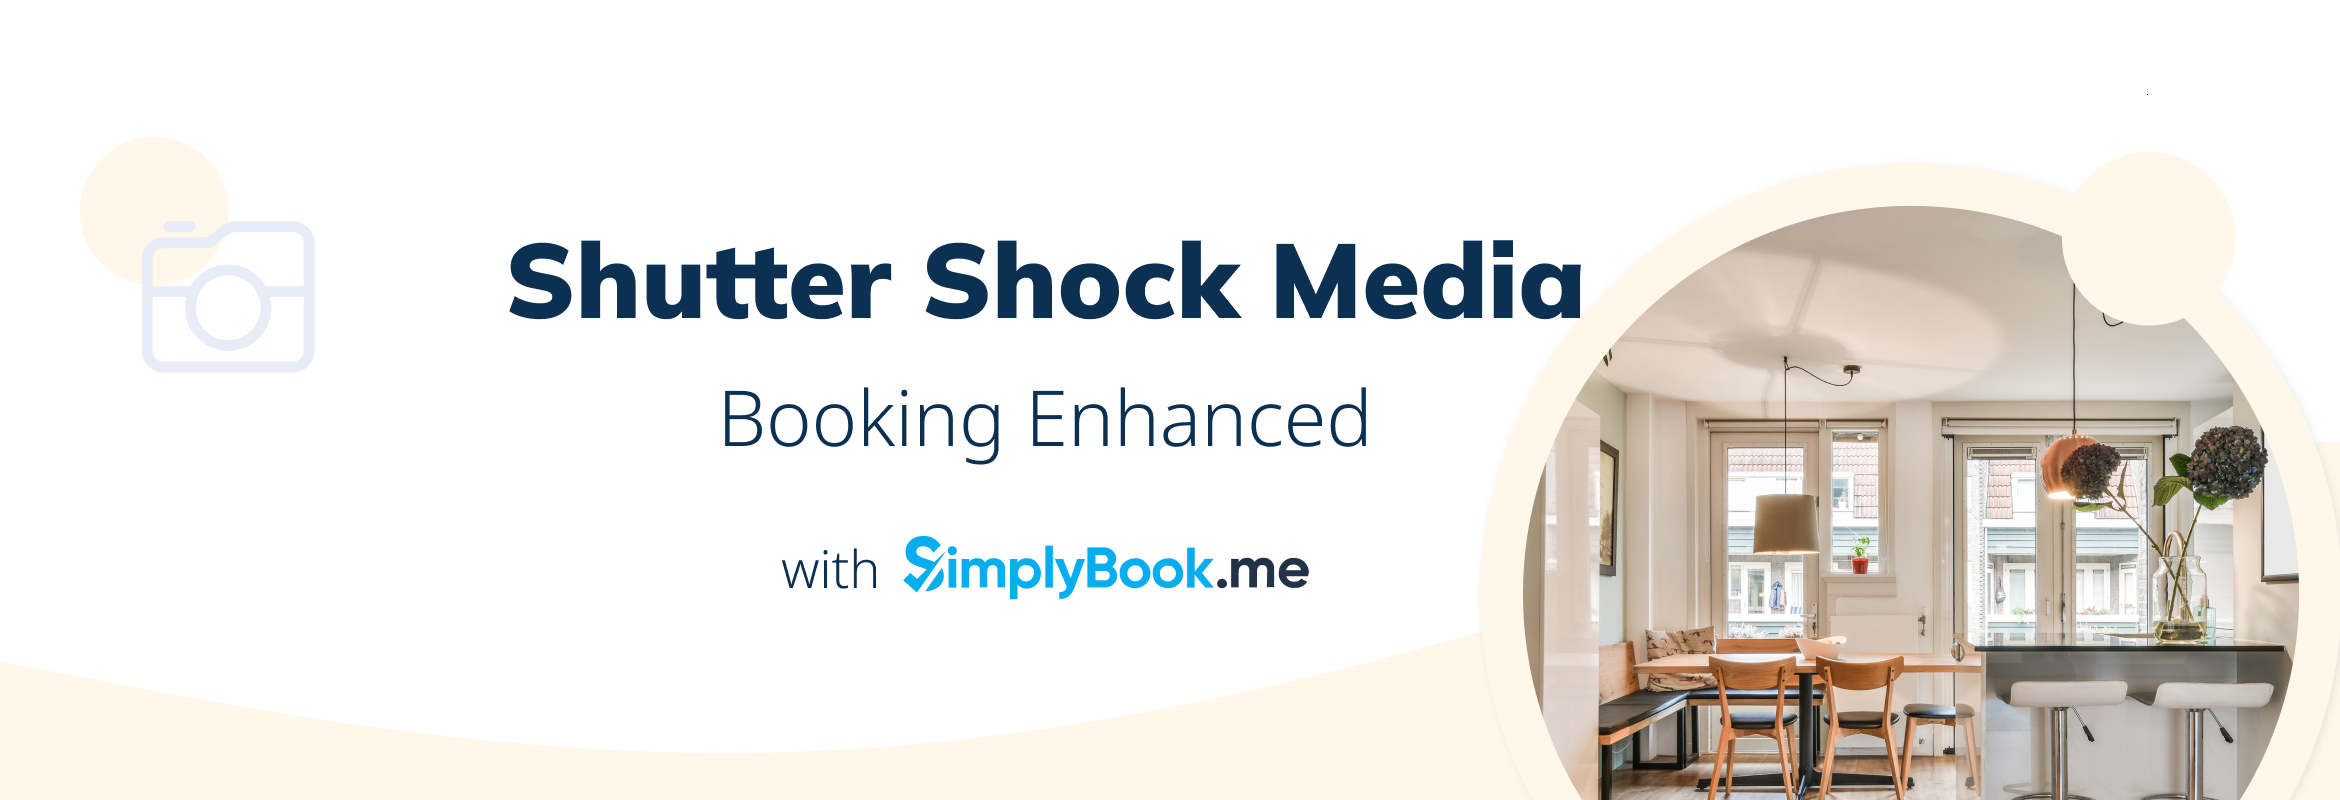 Shutter Stock Media uses SimplyBook.me